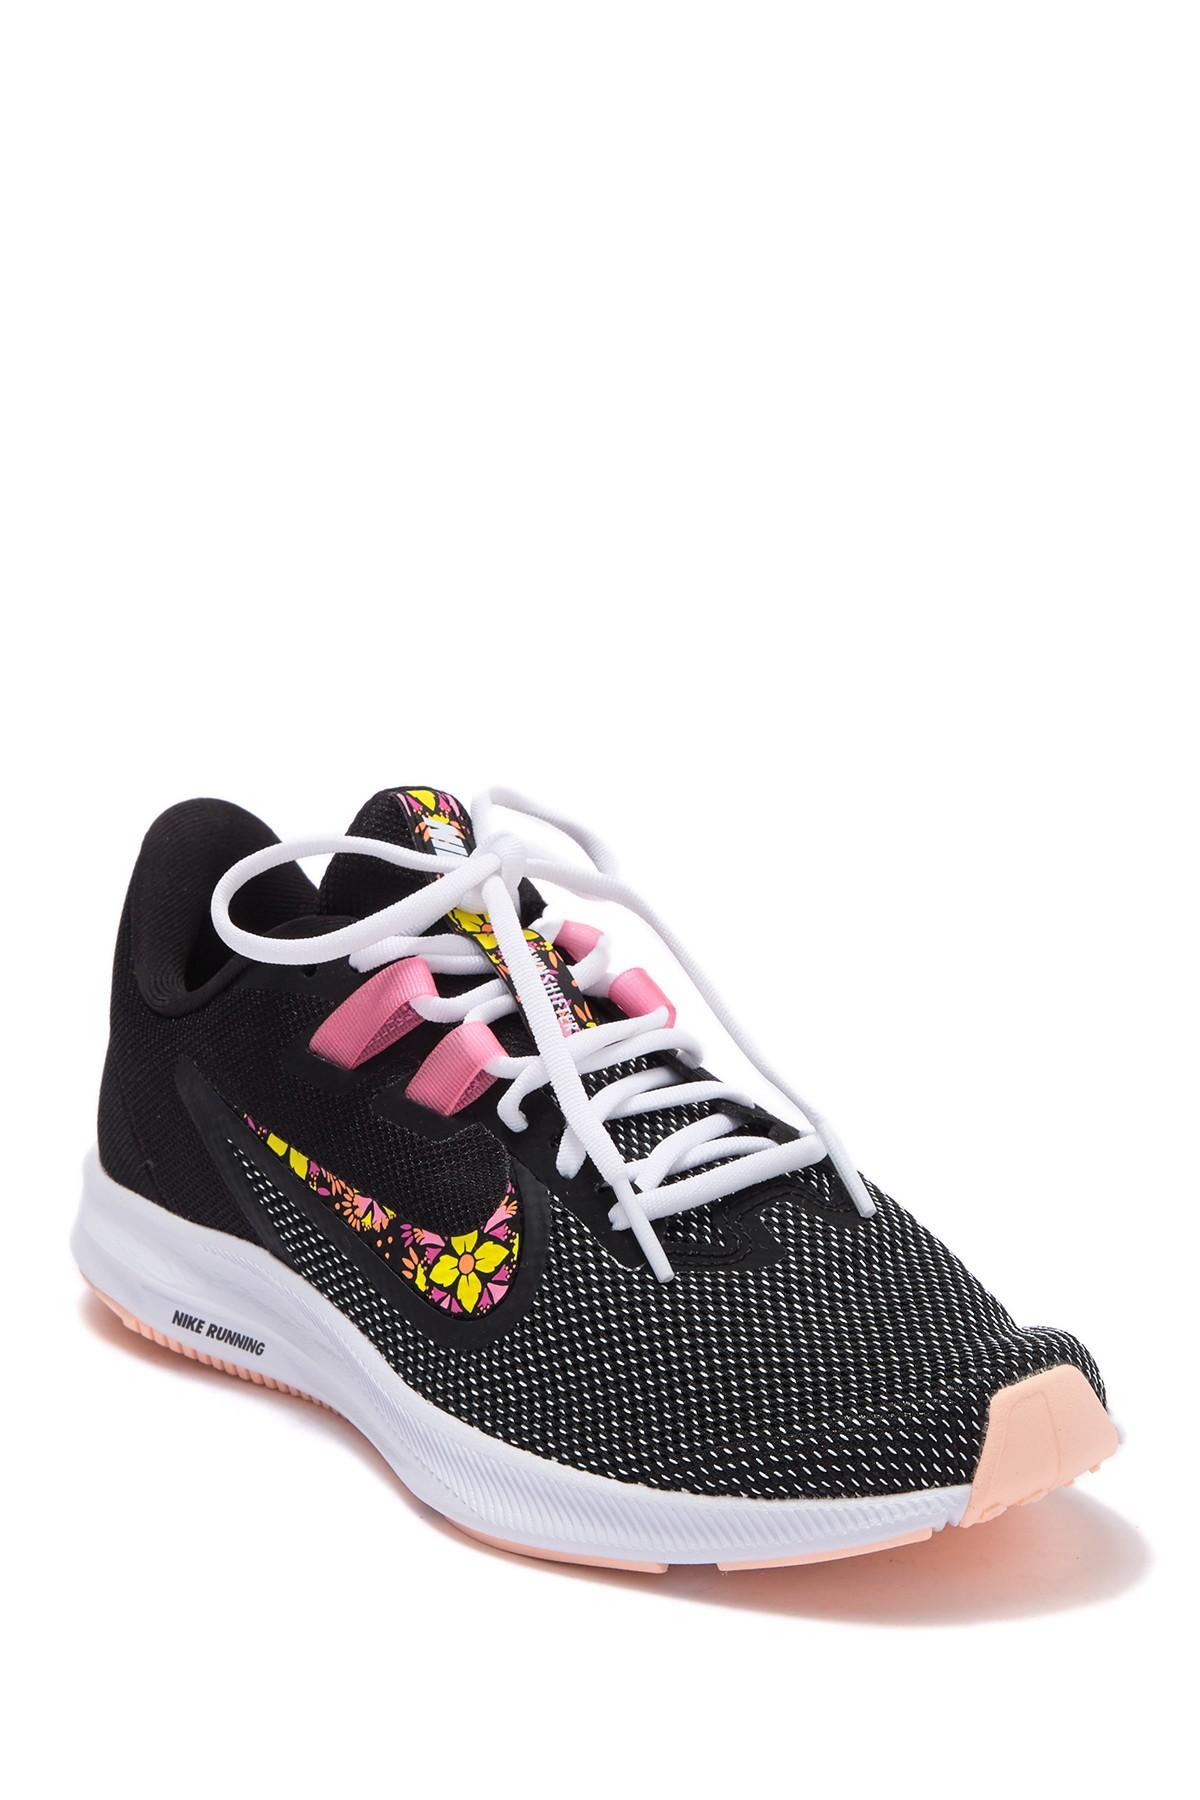 nike downshifter 9 floral